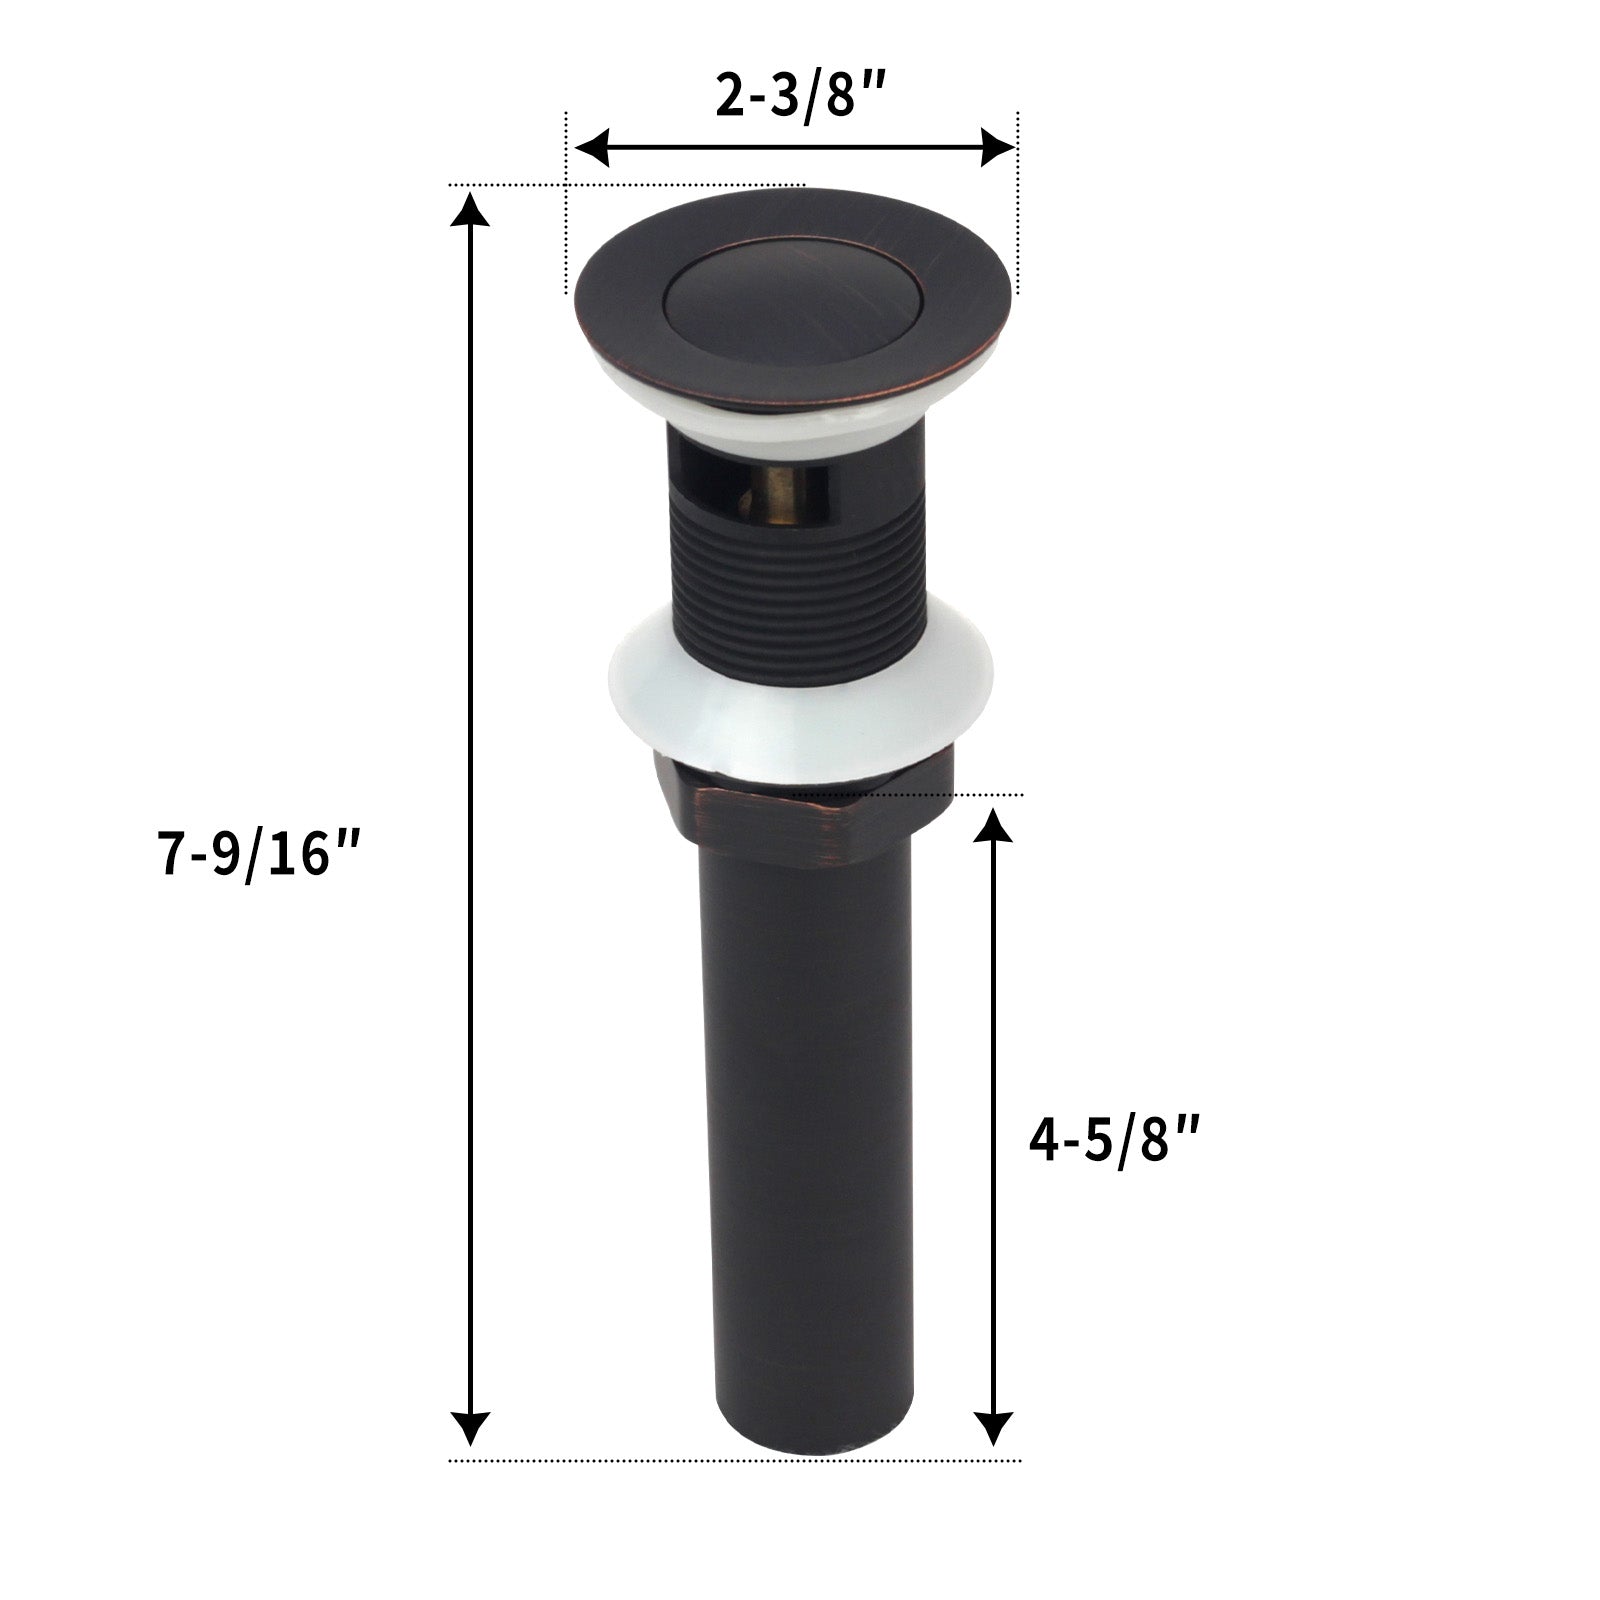 Oil Rubbed Bronze Pop up Drain Stopper With Overflow - AK82003ORB